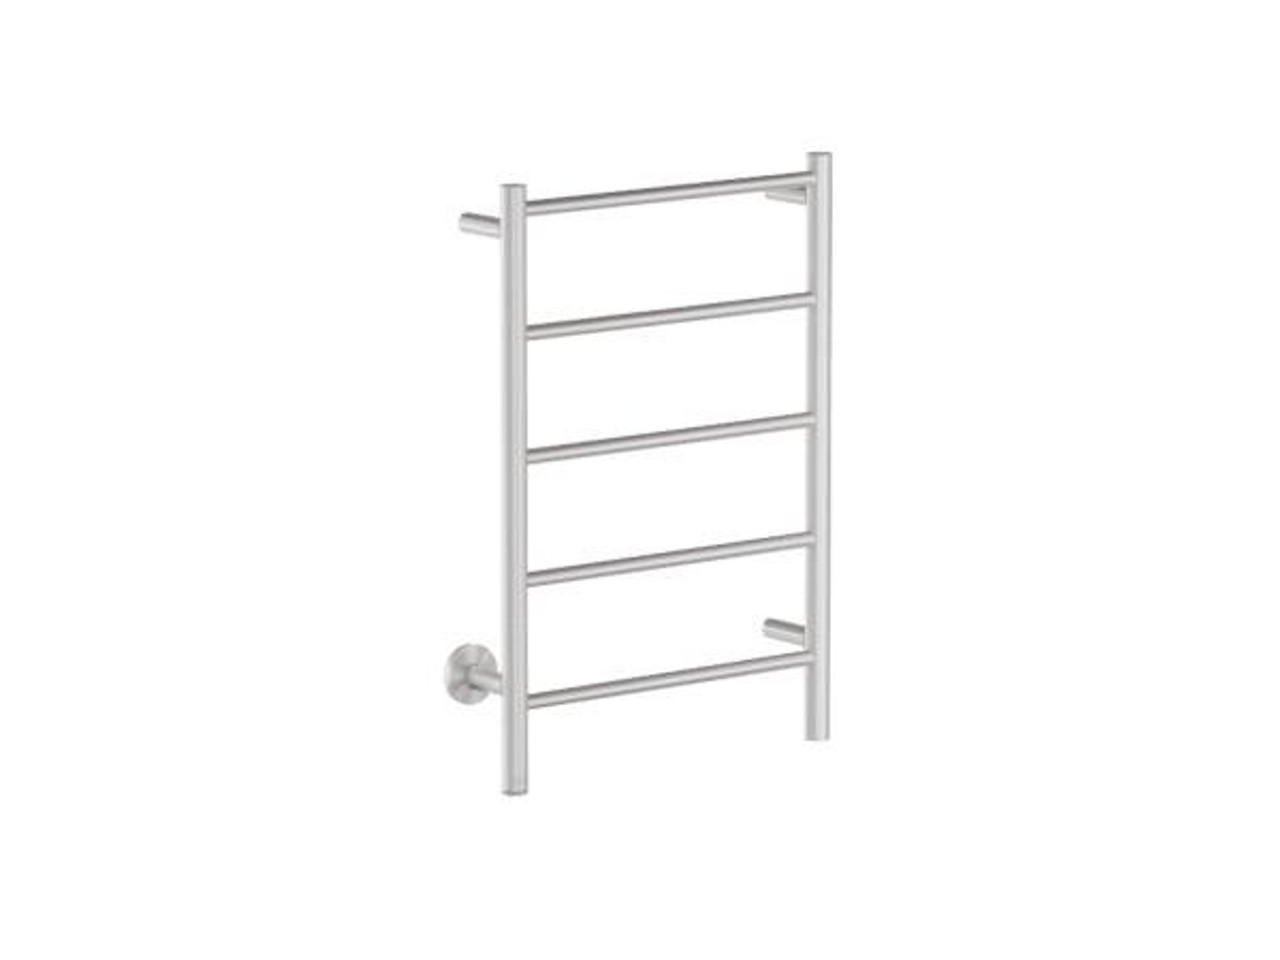 357021 Bathroom Butler Natural 5 Bar 500mm Straight Heated Towel Rail with PTSelect Switch Brushed Nickel PVD NAT05221-PTS-FBNK